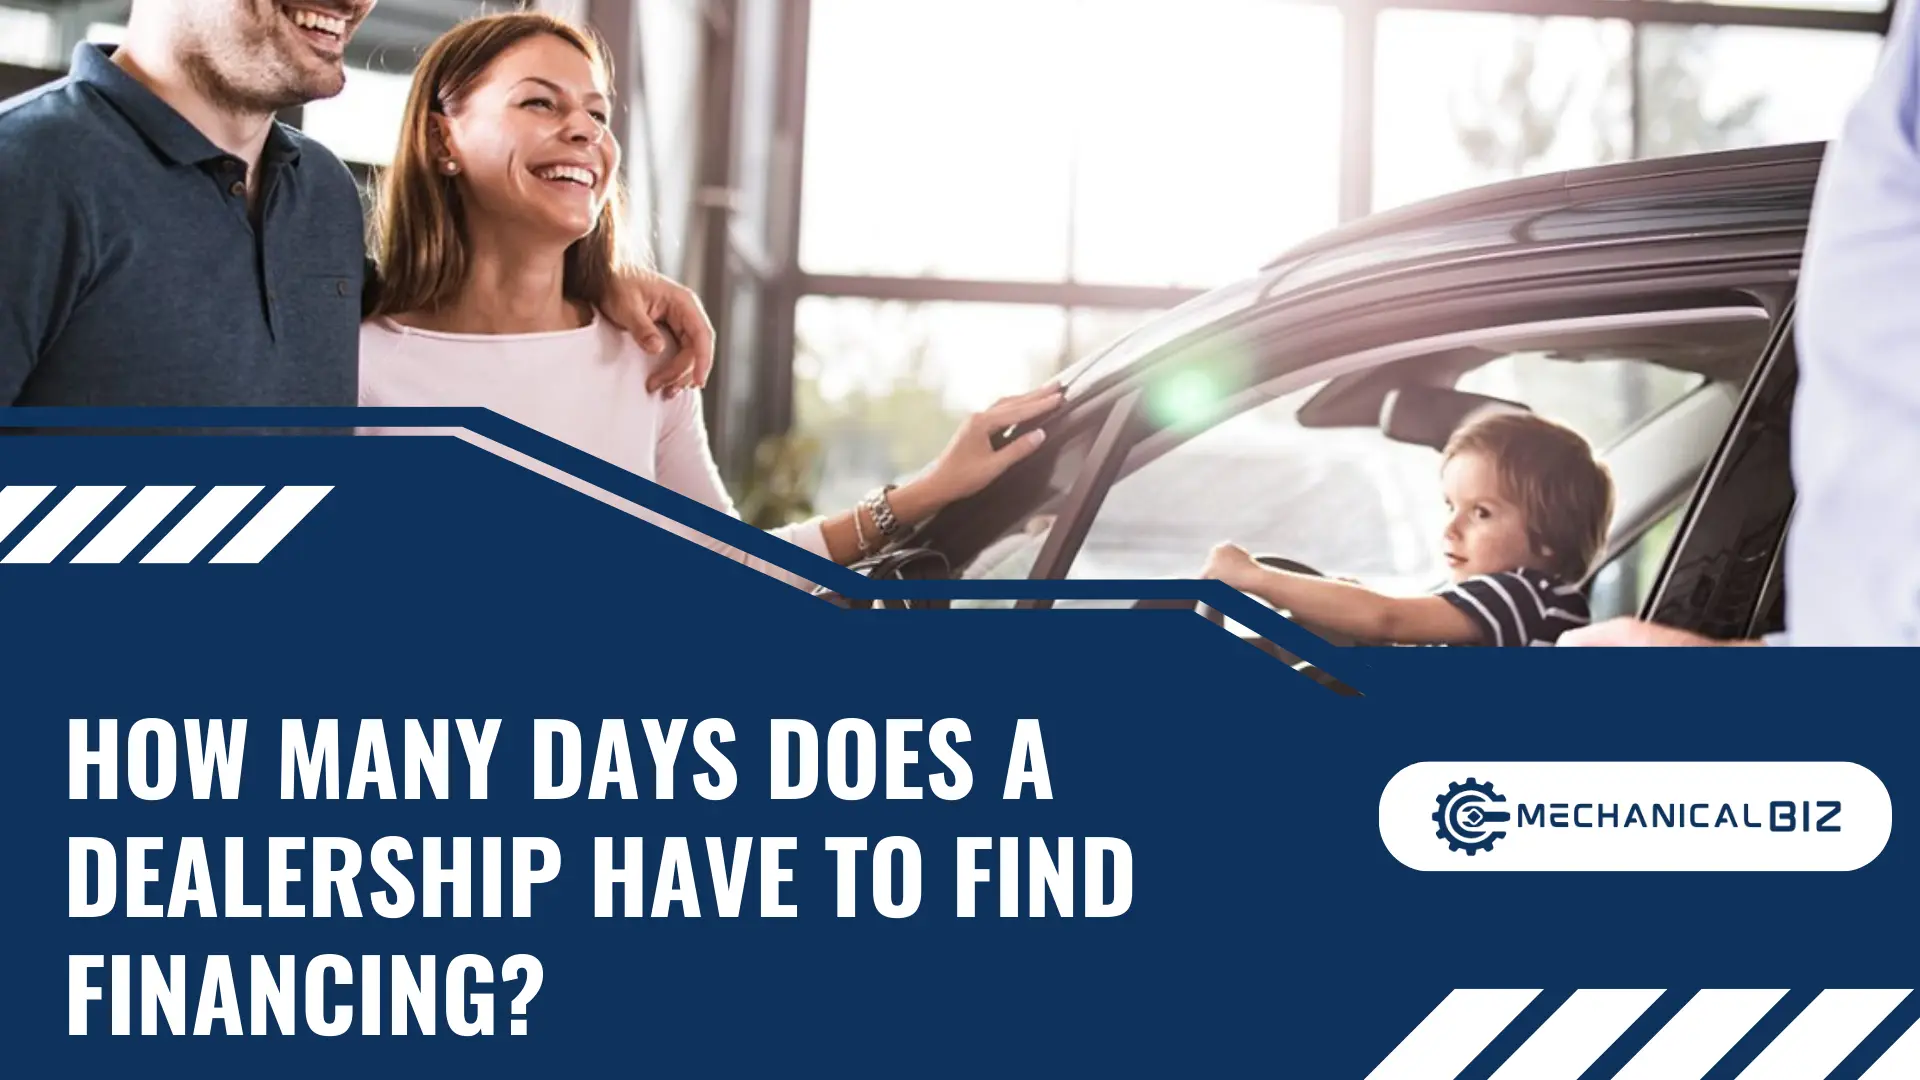 How Many Days Does a Dealership Have to Find Financing